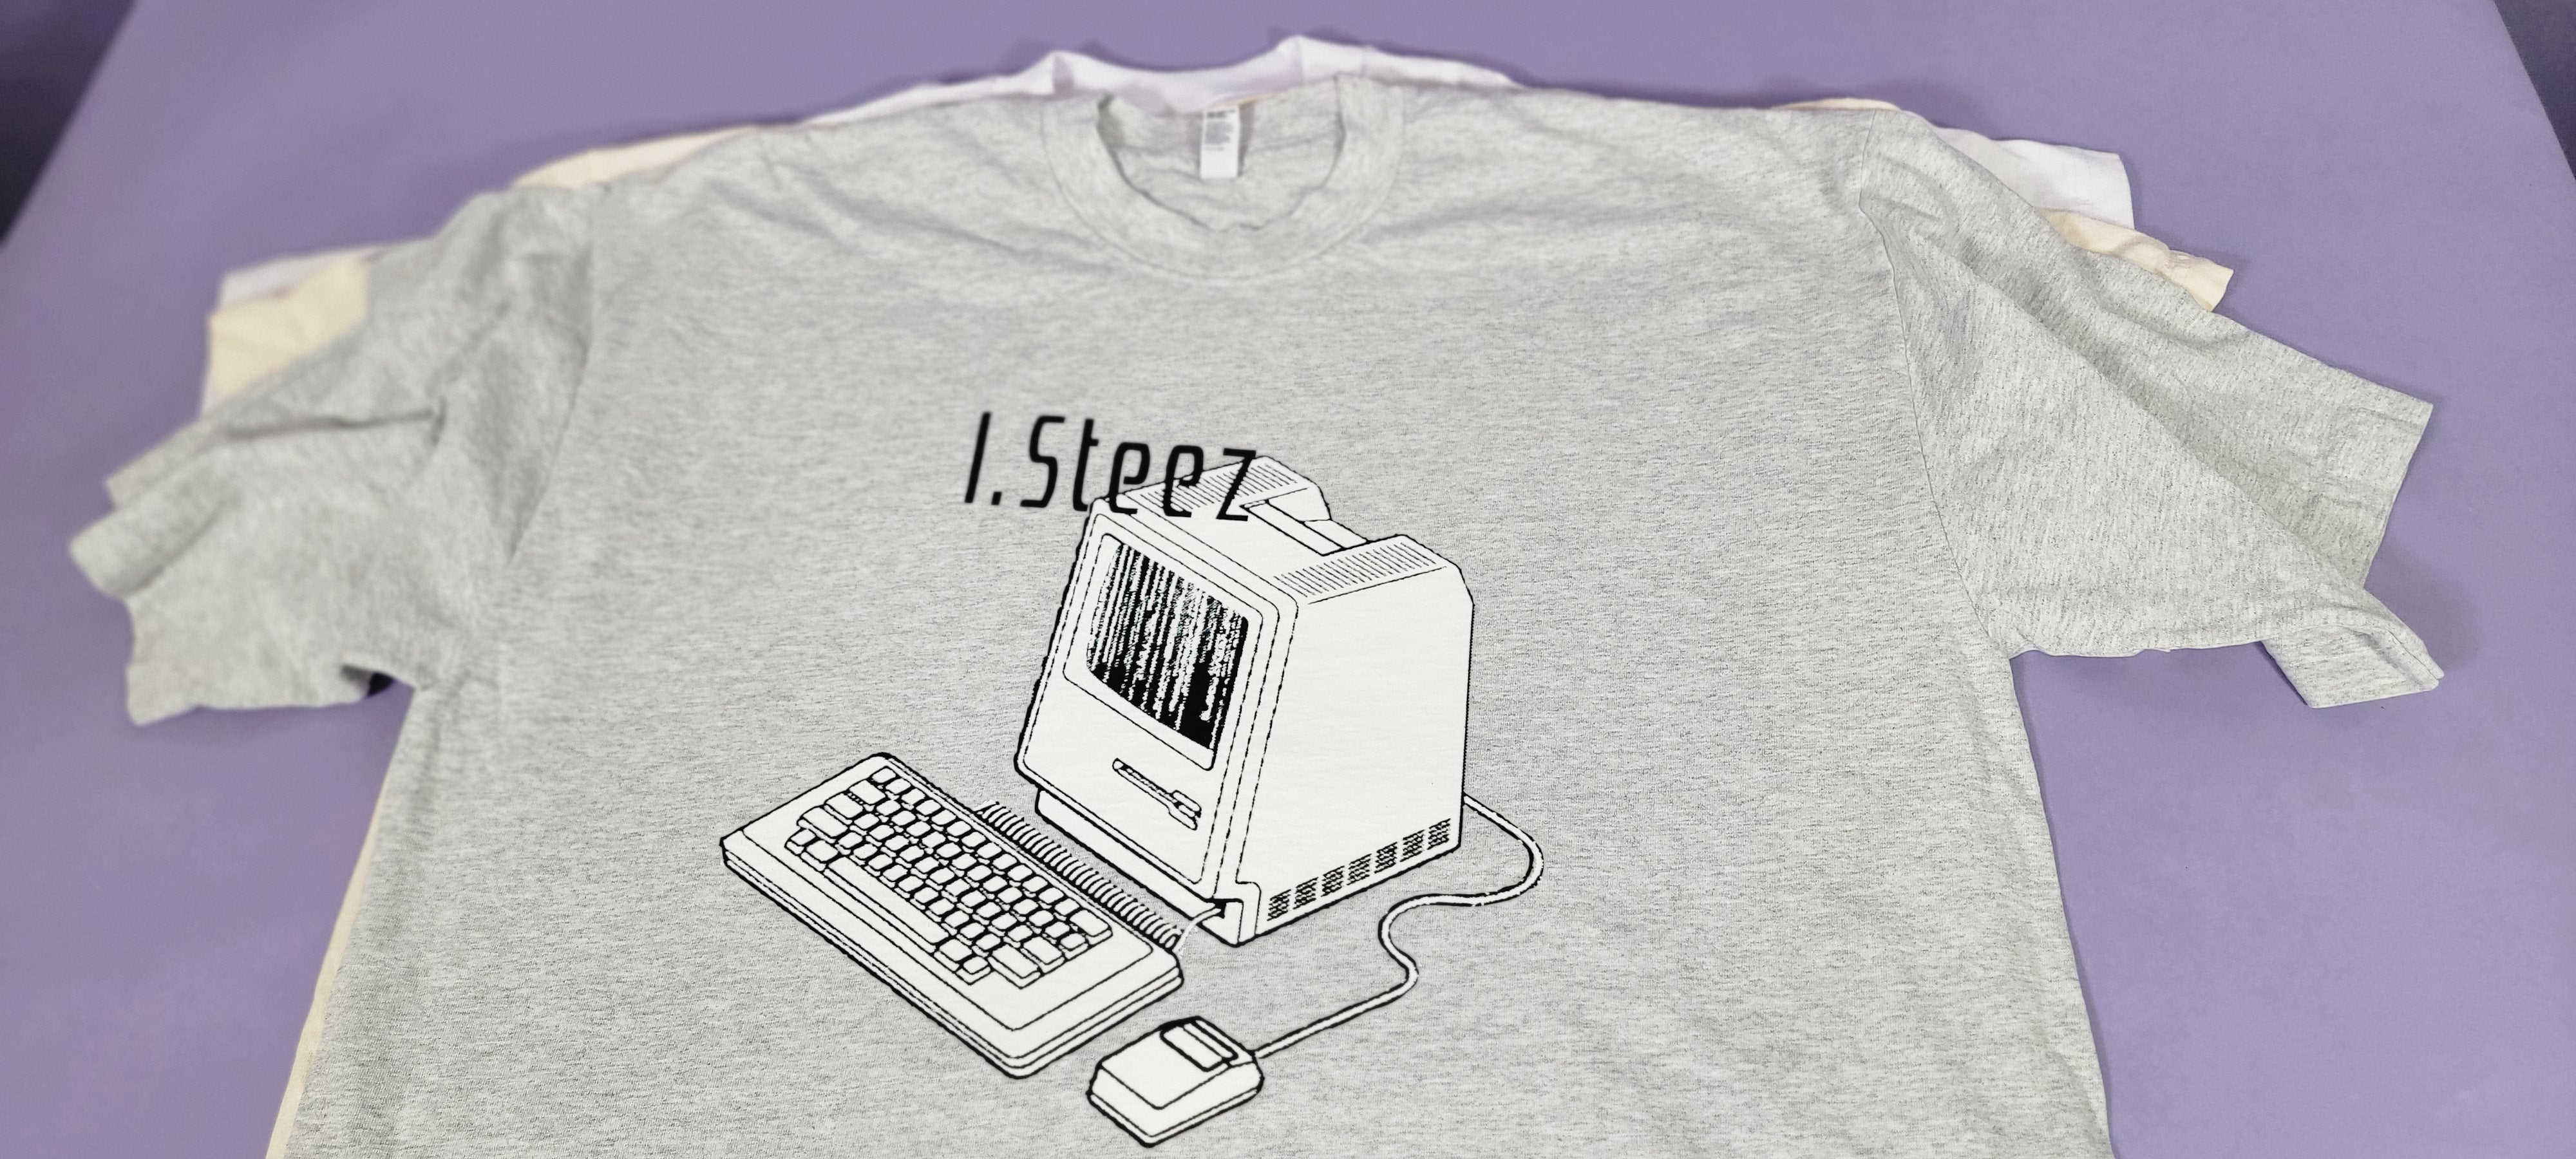 Vintage iSteez  Screen Printed Graphic T Shirt